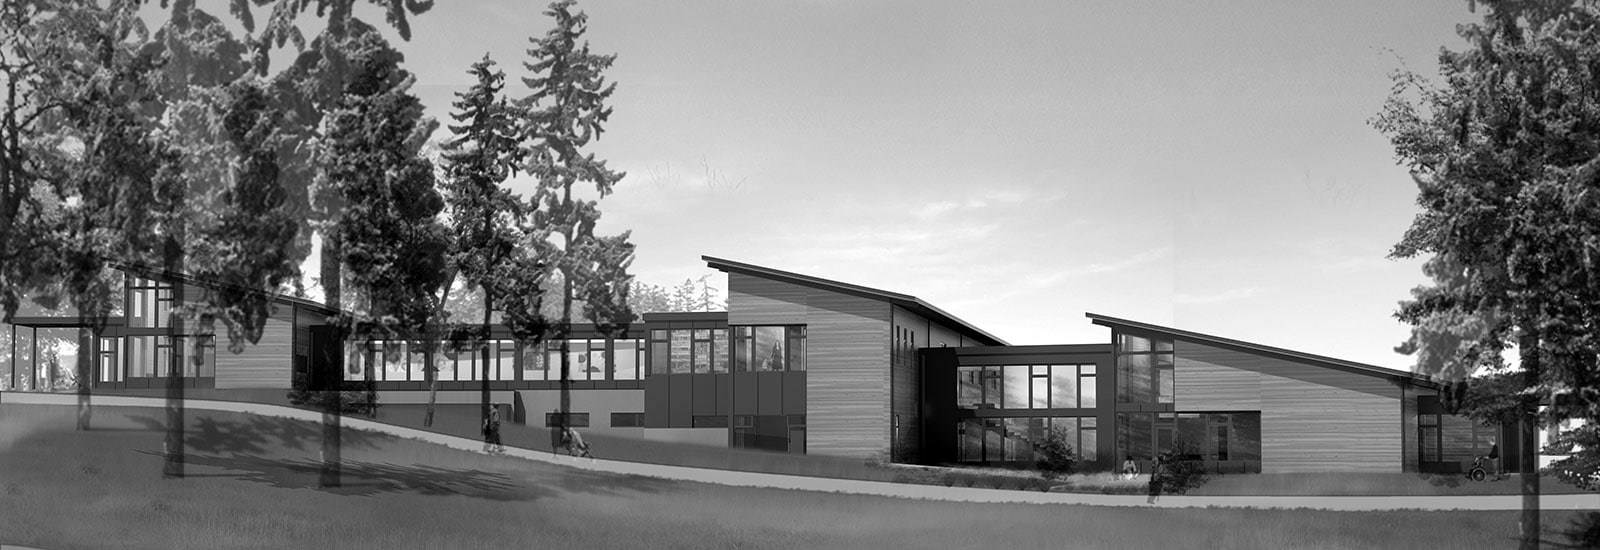 PeaceHealth Rendering Grayscale